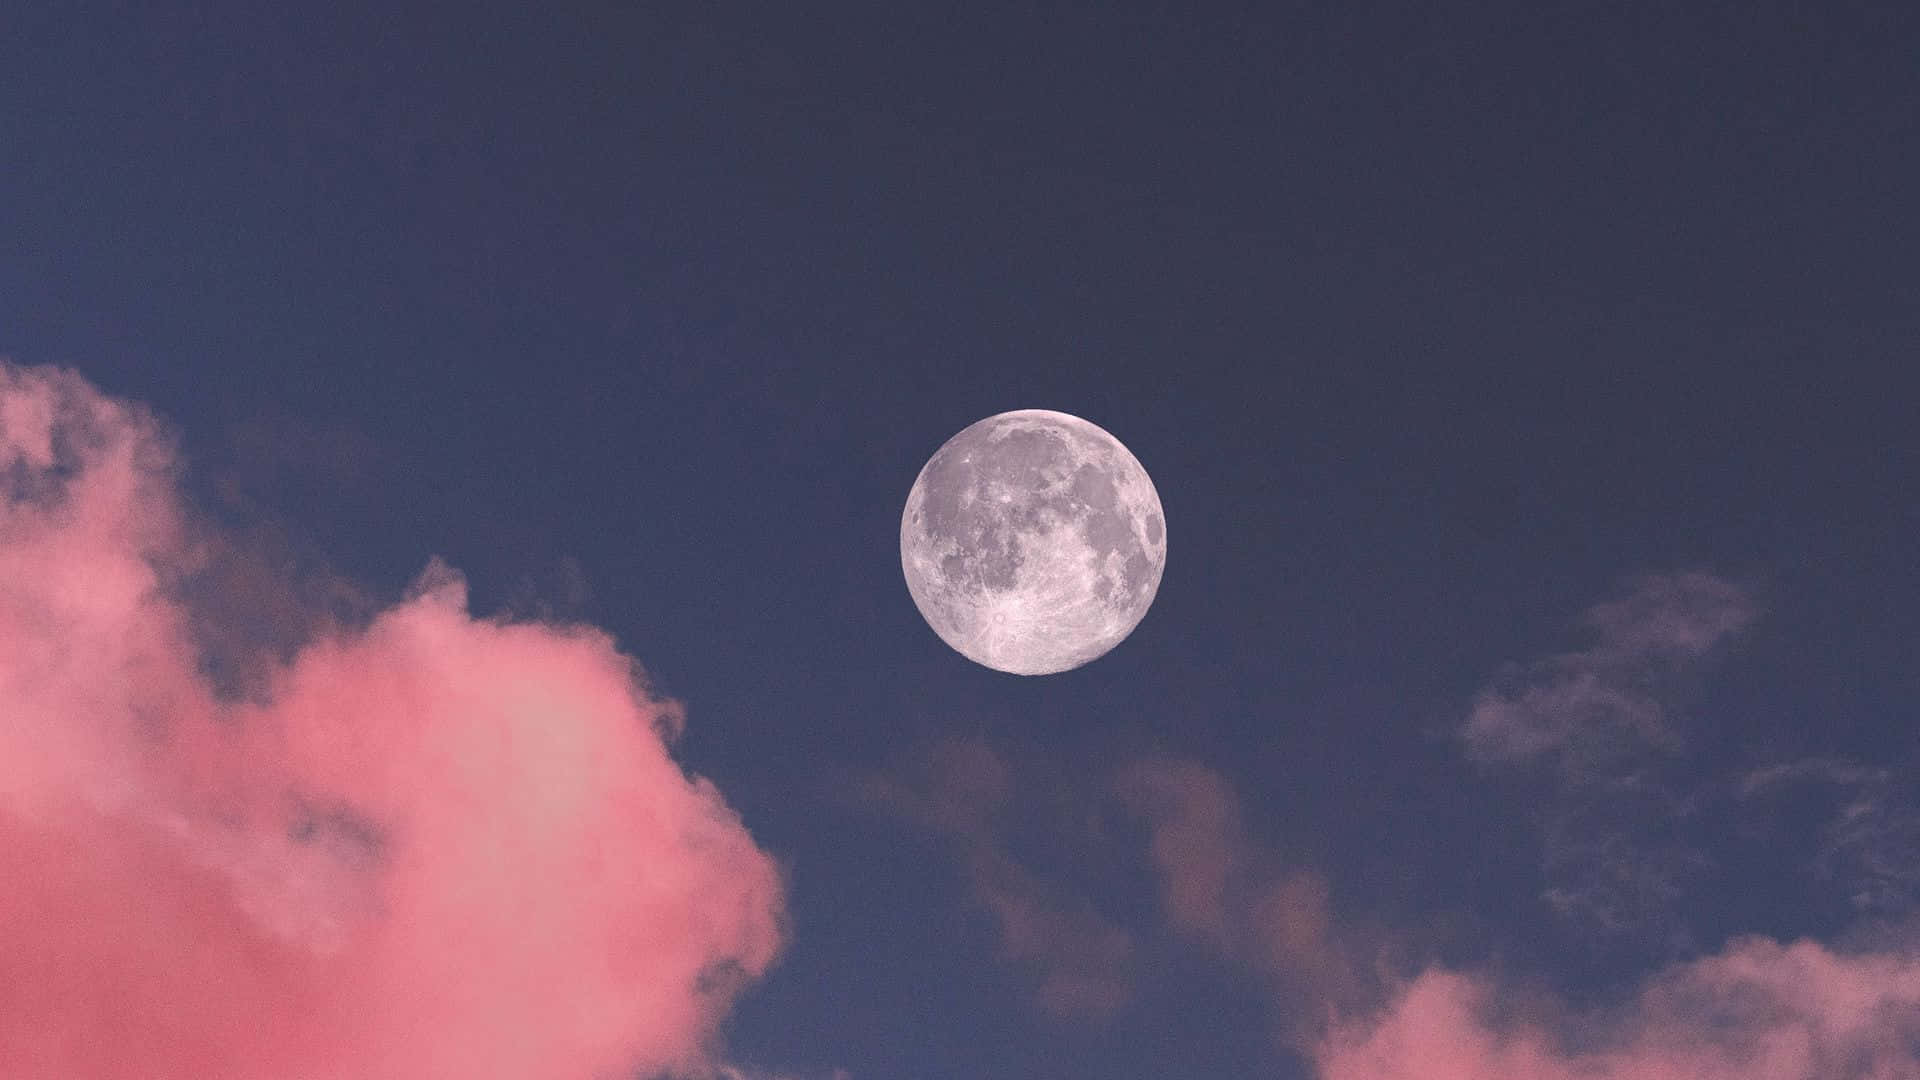 "The beauty of a pink moon" Wallpaper